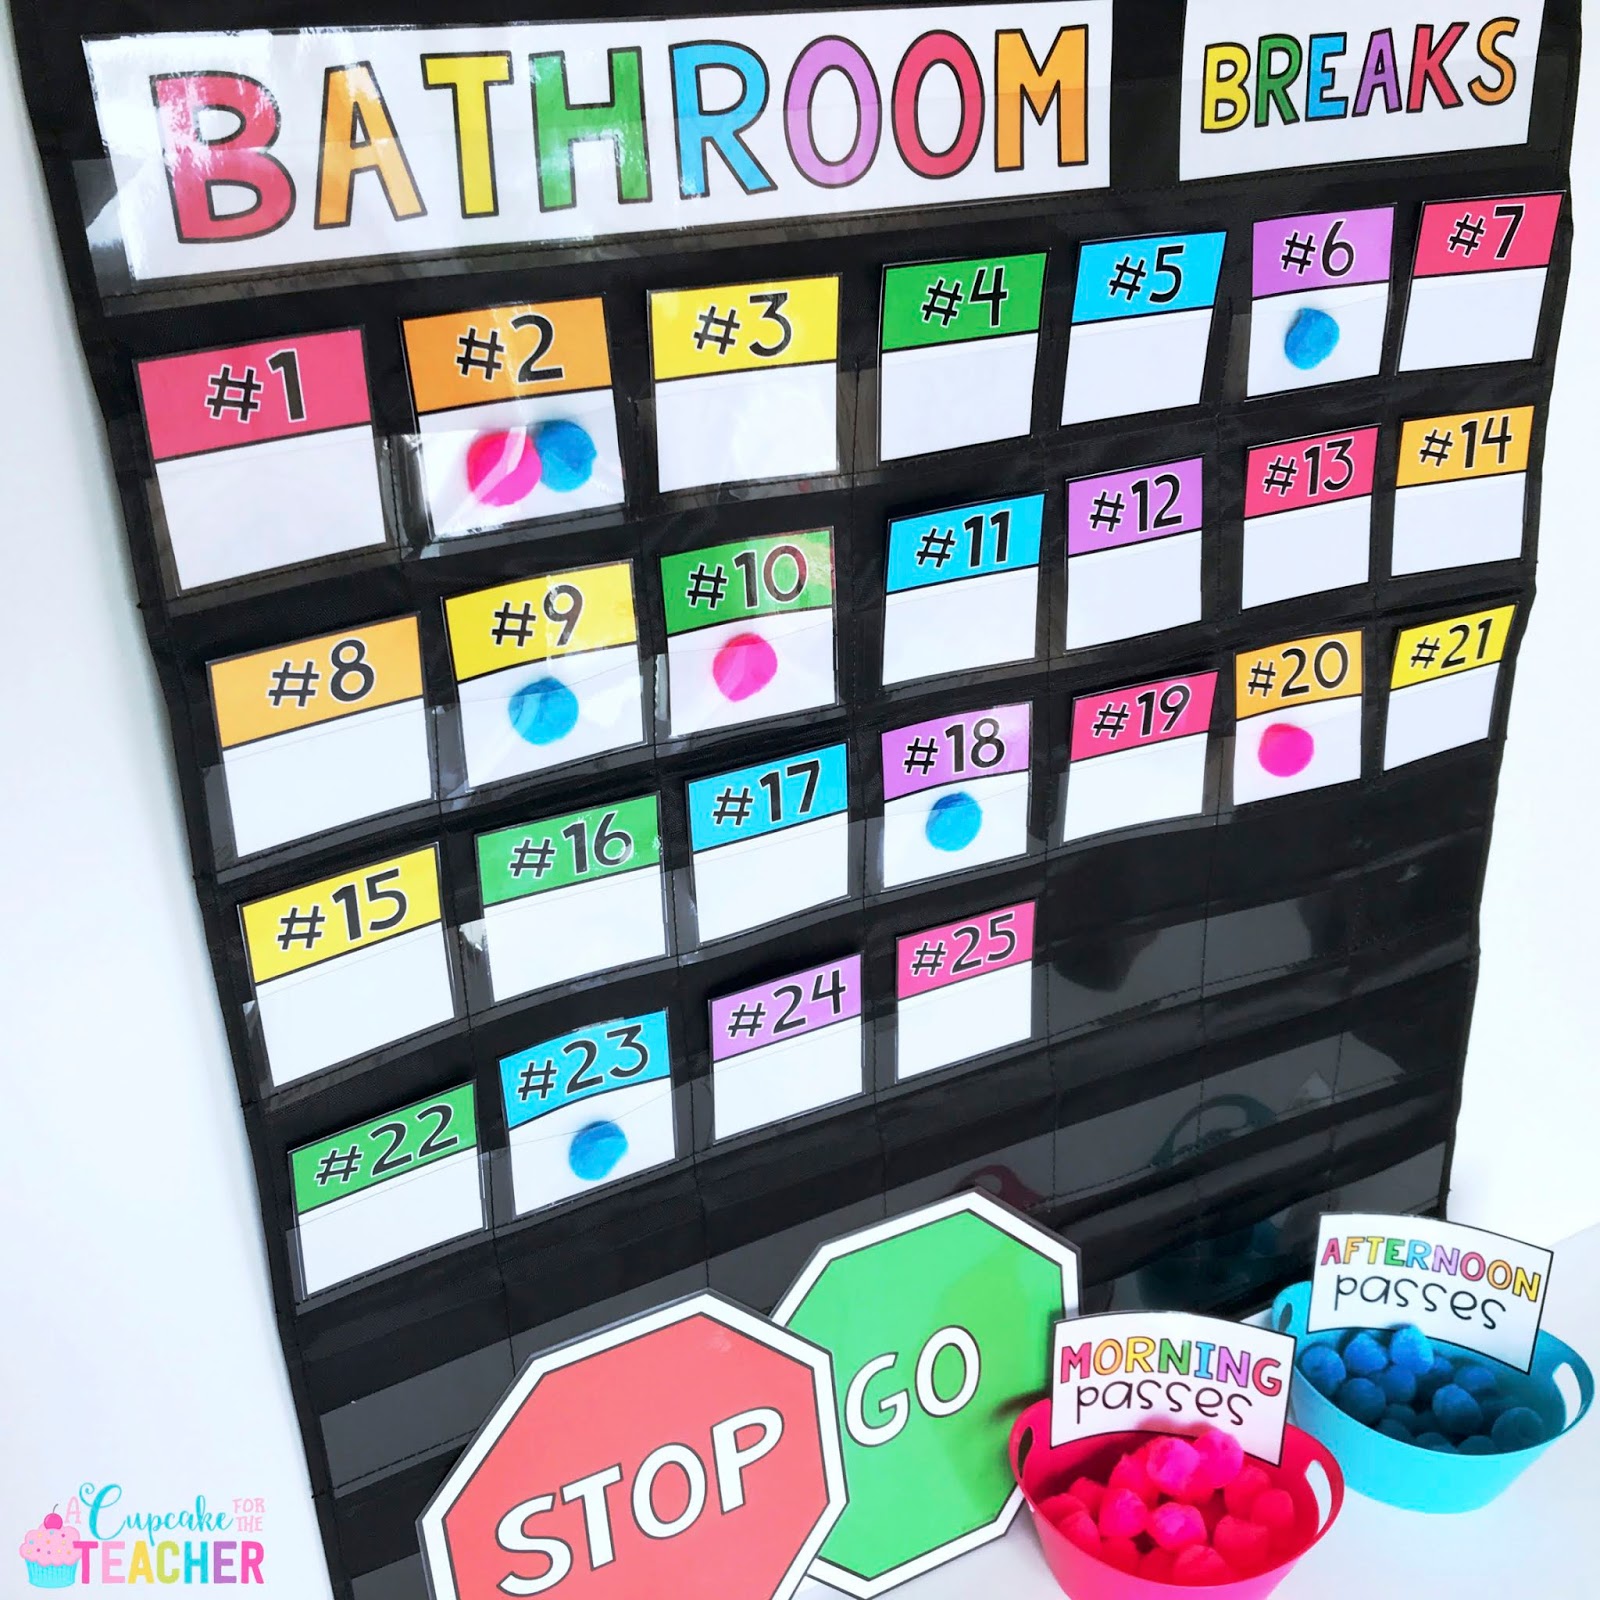 Use these bathroom breaks pom pom charts from my Bathroom Rules & Management Kit as part of your bathroom management strategy in your elementary classroom